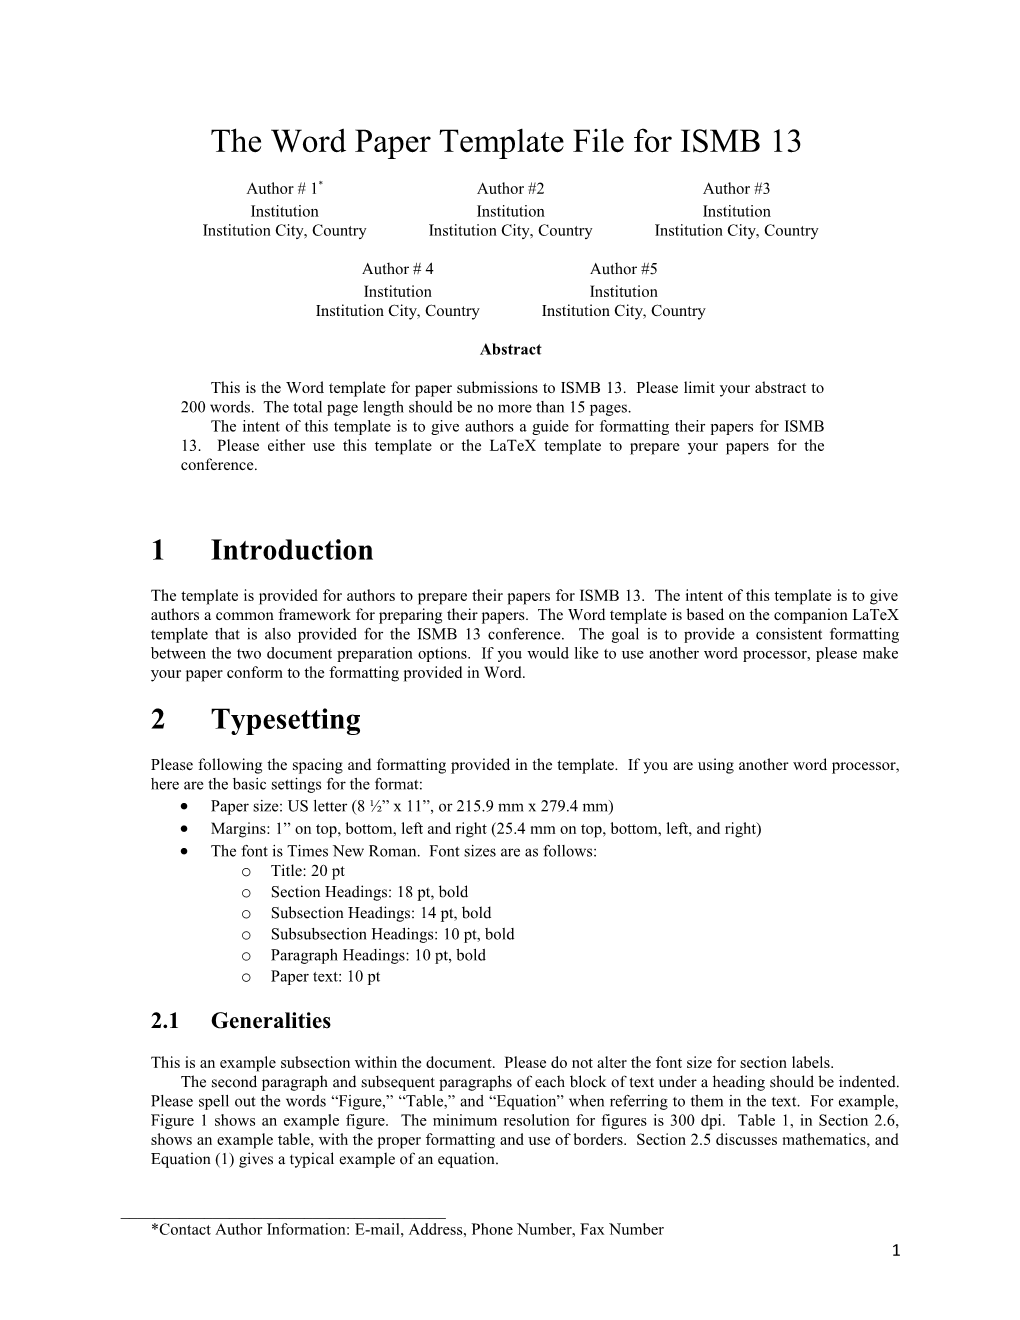 The Word Paper Template File for ISMB 13